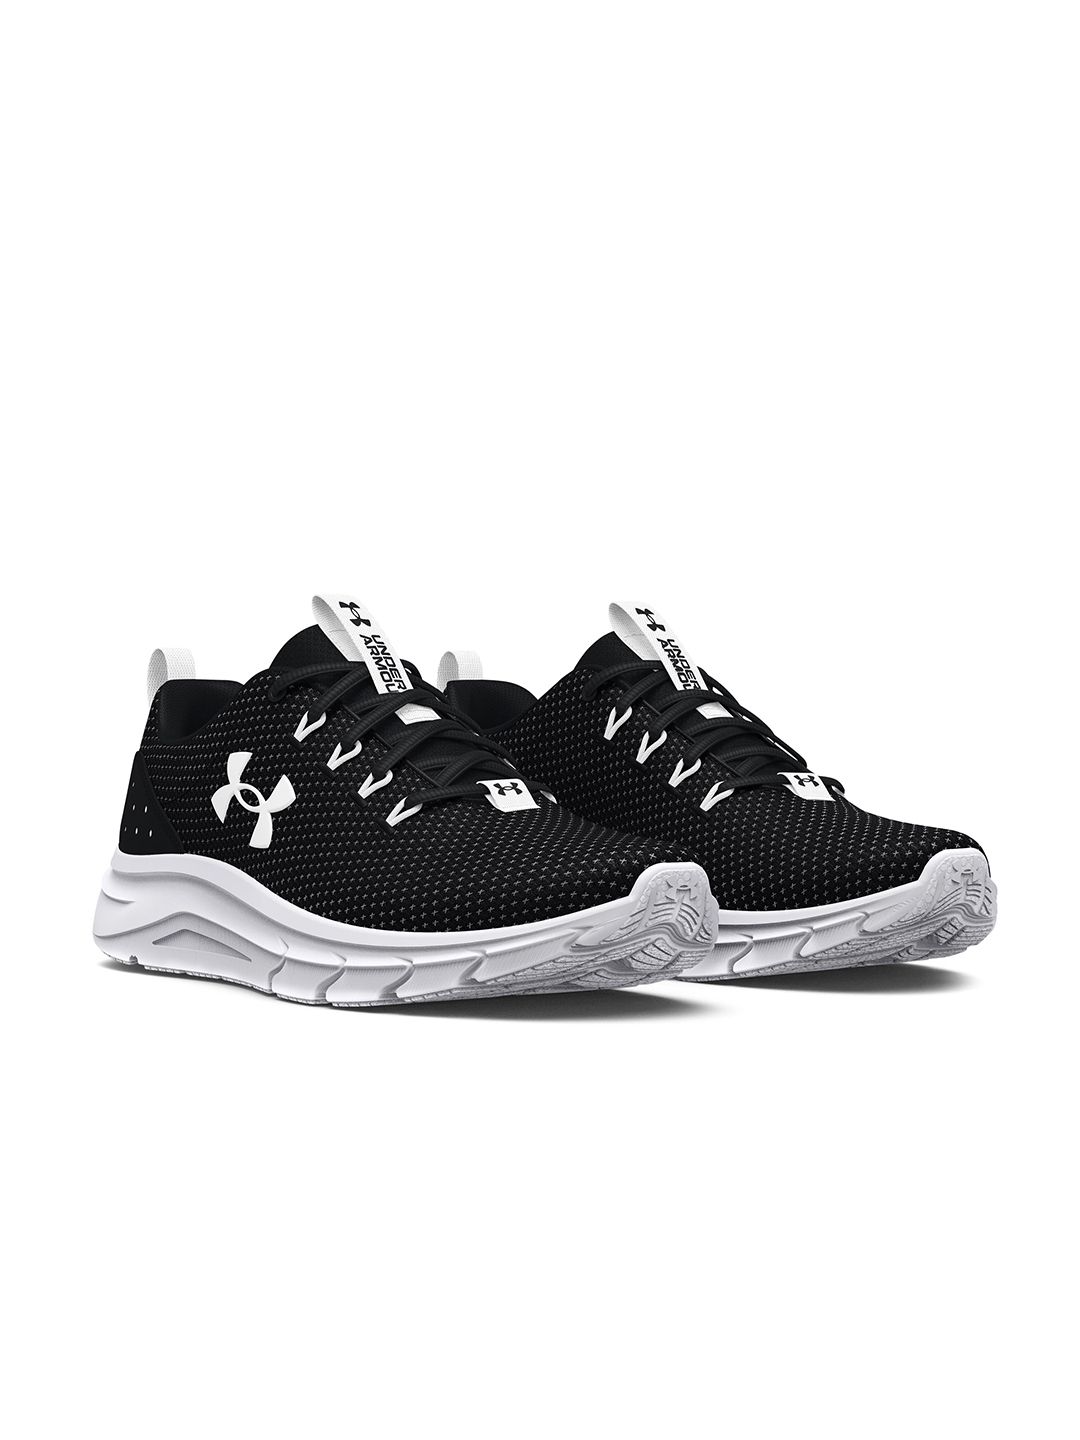 UNDER ARMOUR Women Black Phade 2 Running Shoes Price in India